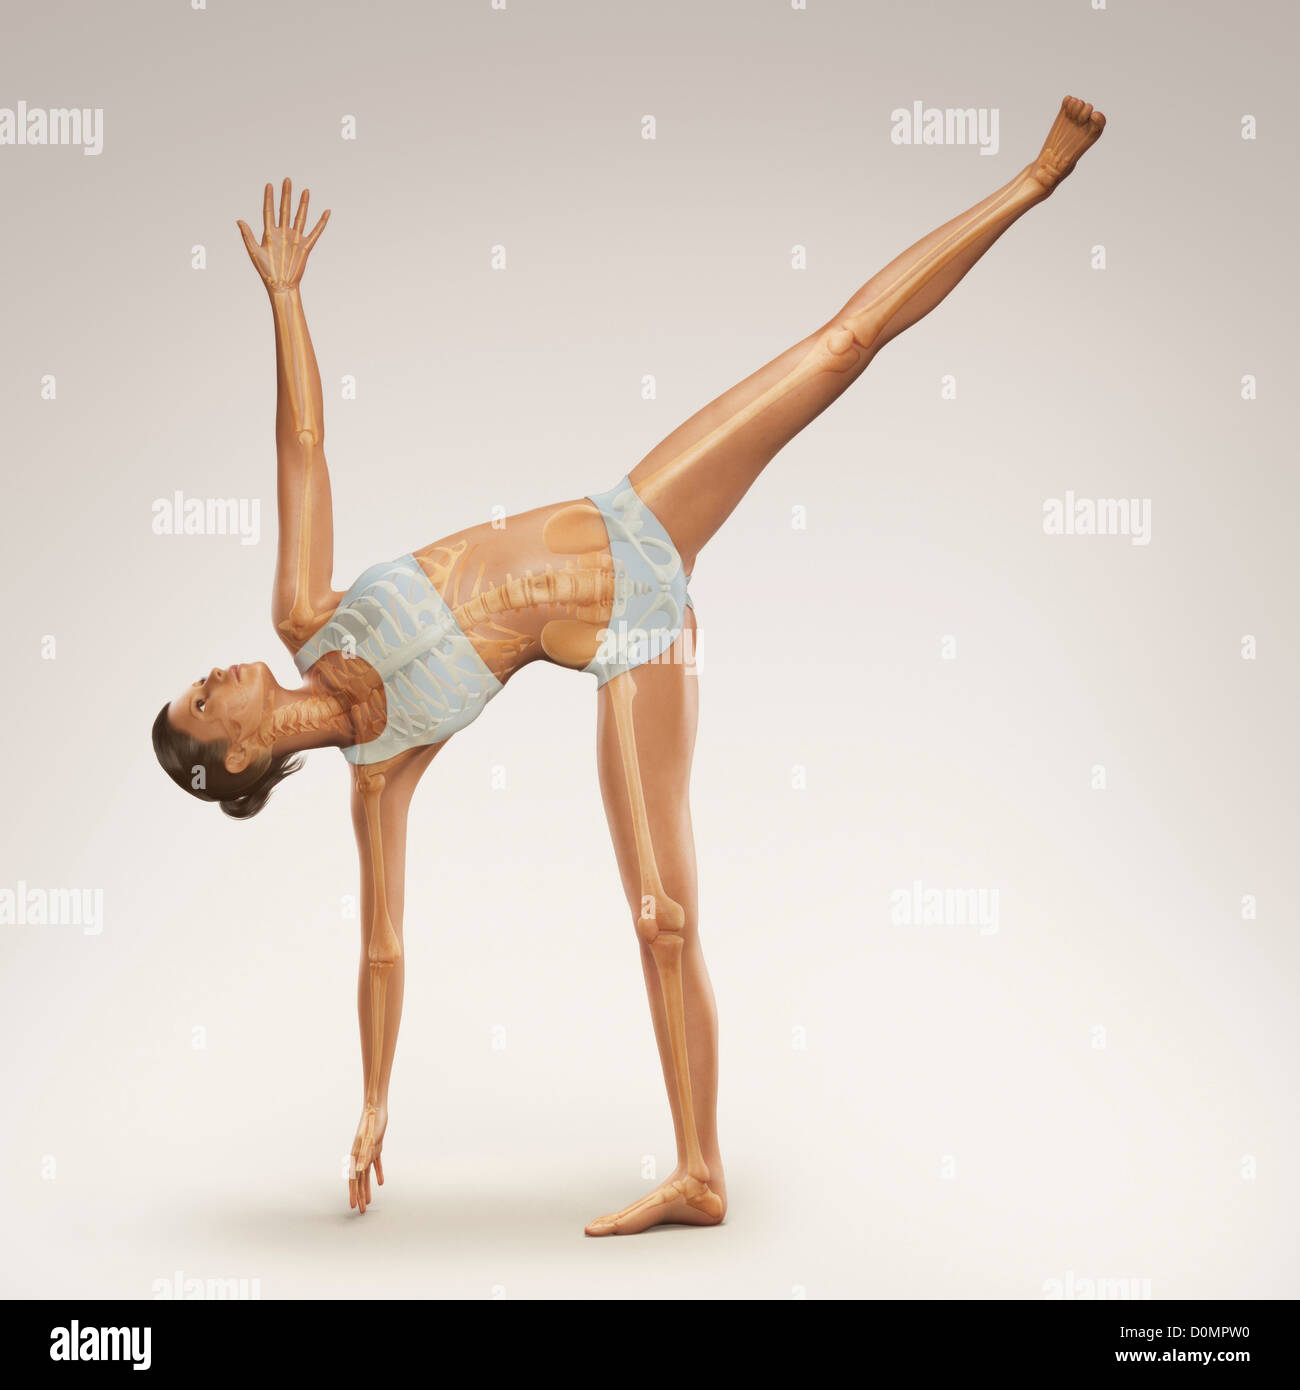 Skeleton layered over a female body in half moon pose showing the skeletal alignment of this particular yoga posture. Stock Photo